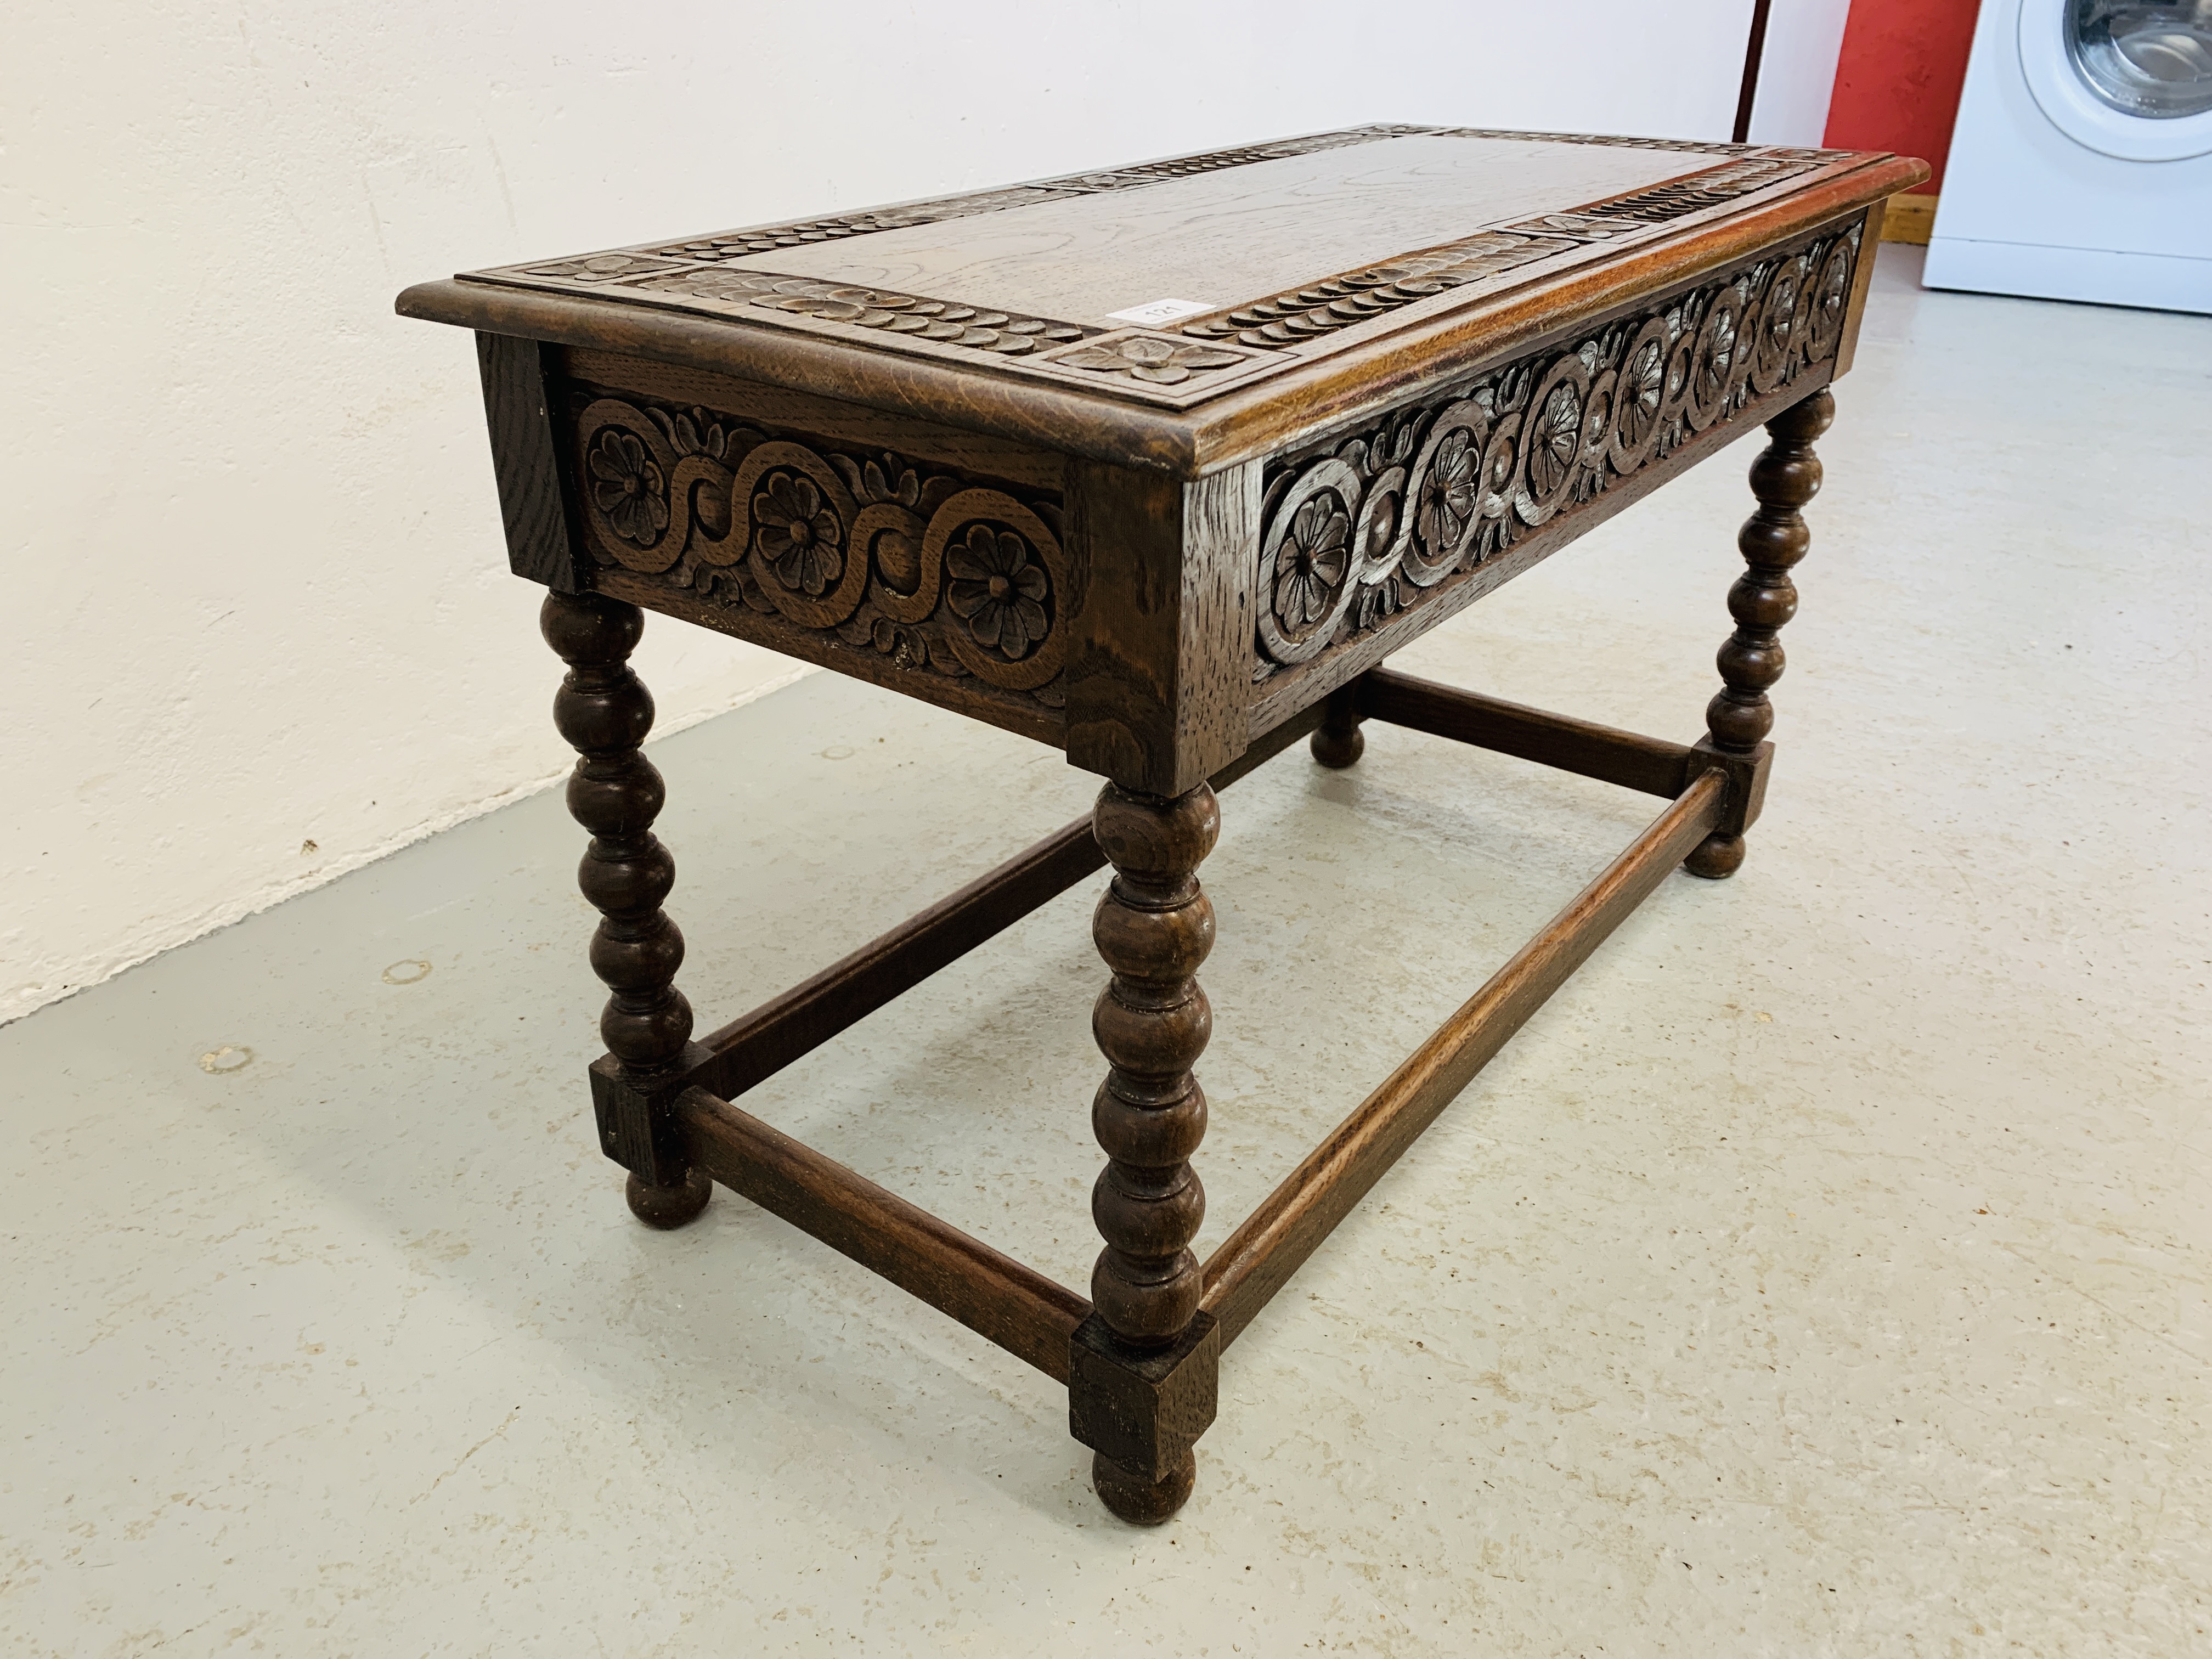 A HAND CARVED OAK SIDE TABLE WITH HINGED TOP AND BOBBIN DETAILED SUPPORTS - W 75CM. D 37CM. H 46CM. - Image 5 of 8